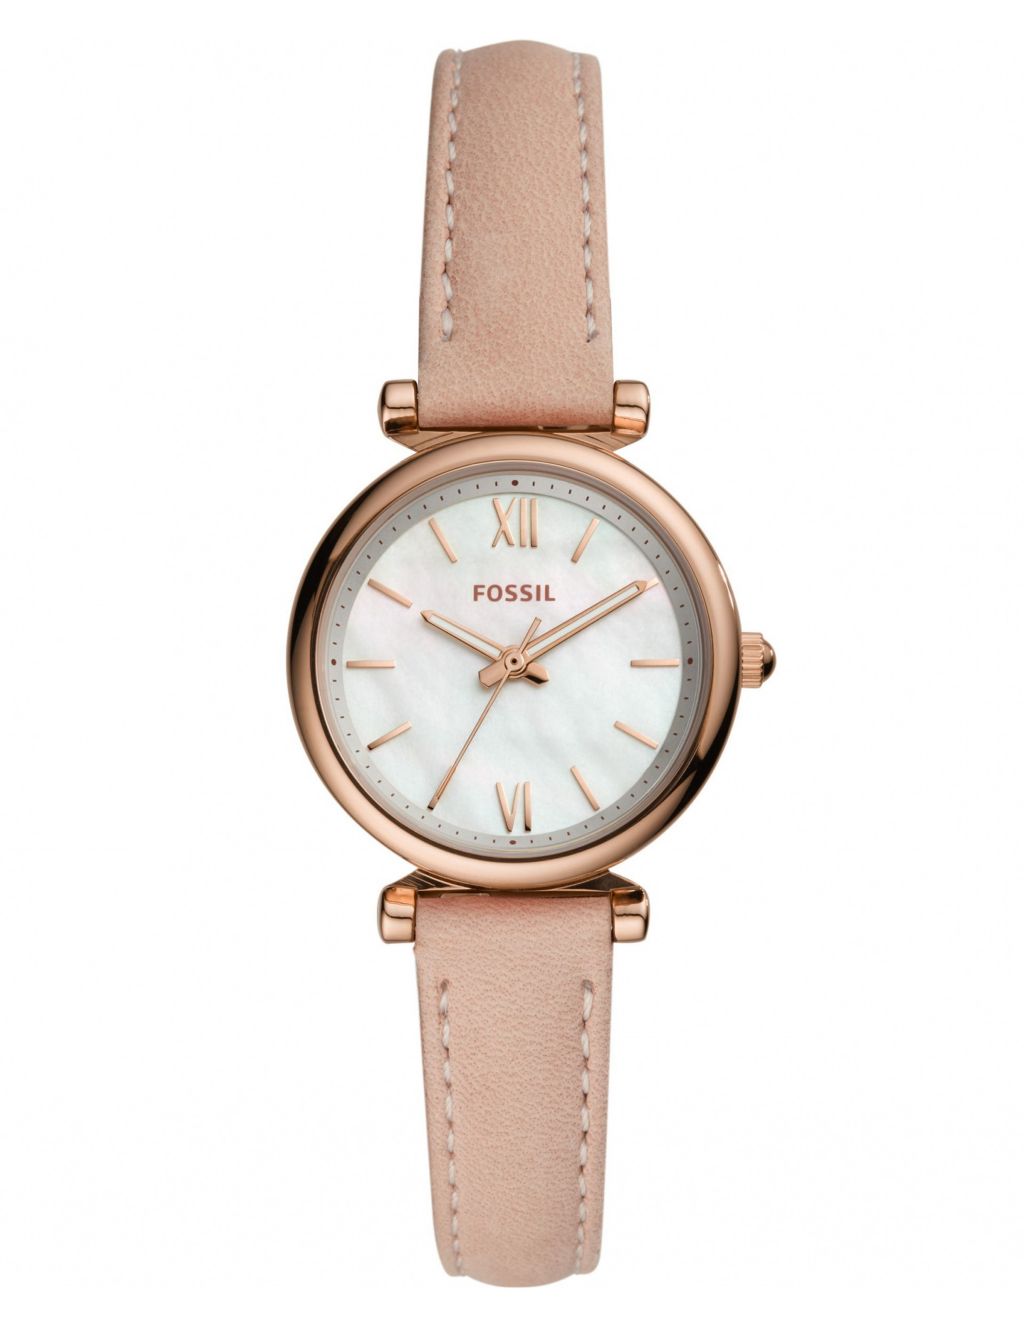 Fossil Carlie Nude Leather Watch